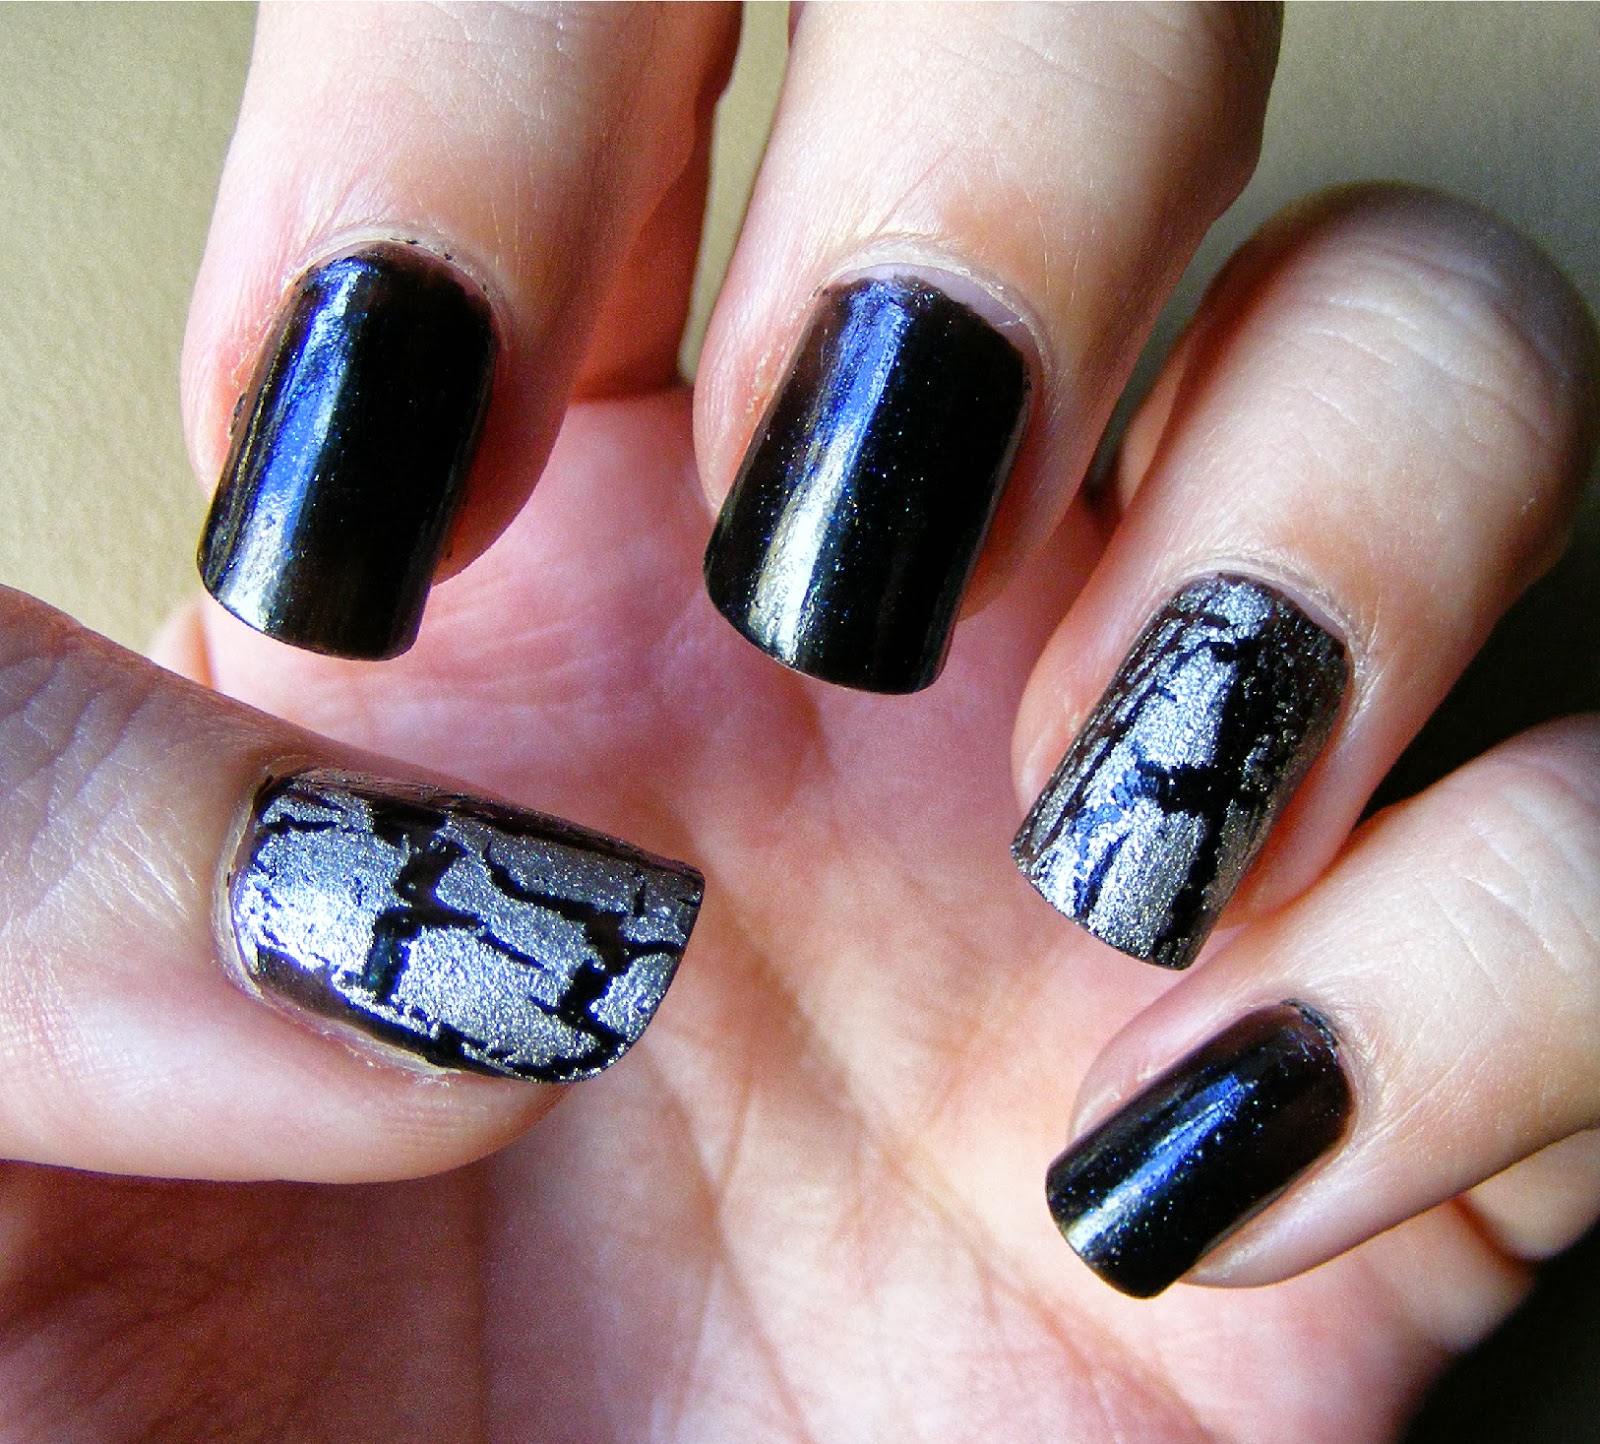 Nails Of The Day (NOTD): Silver crackle